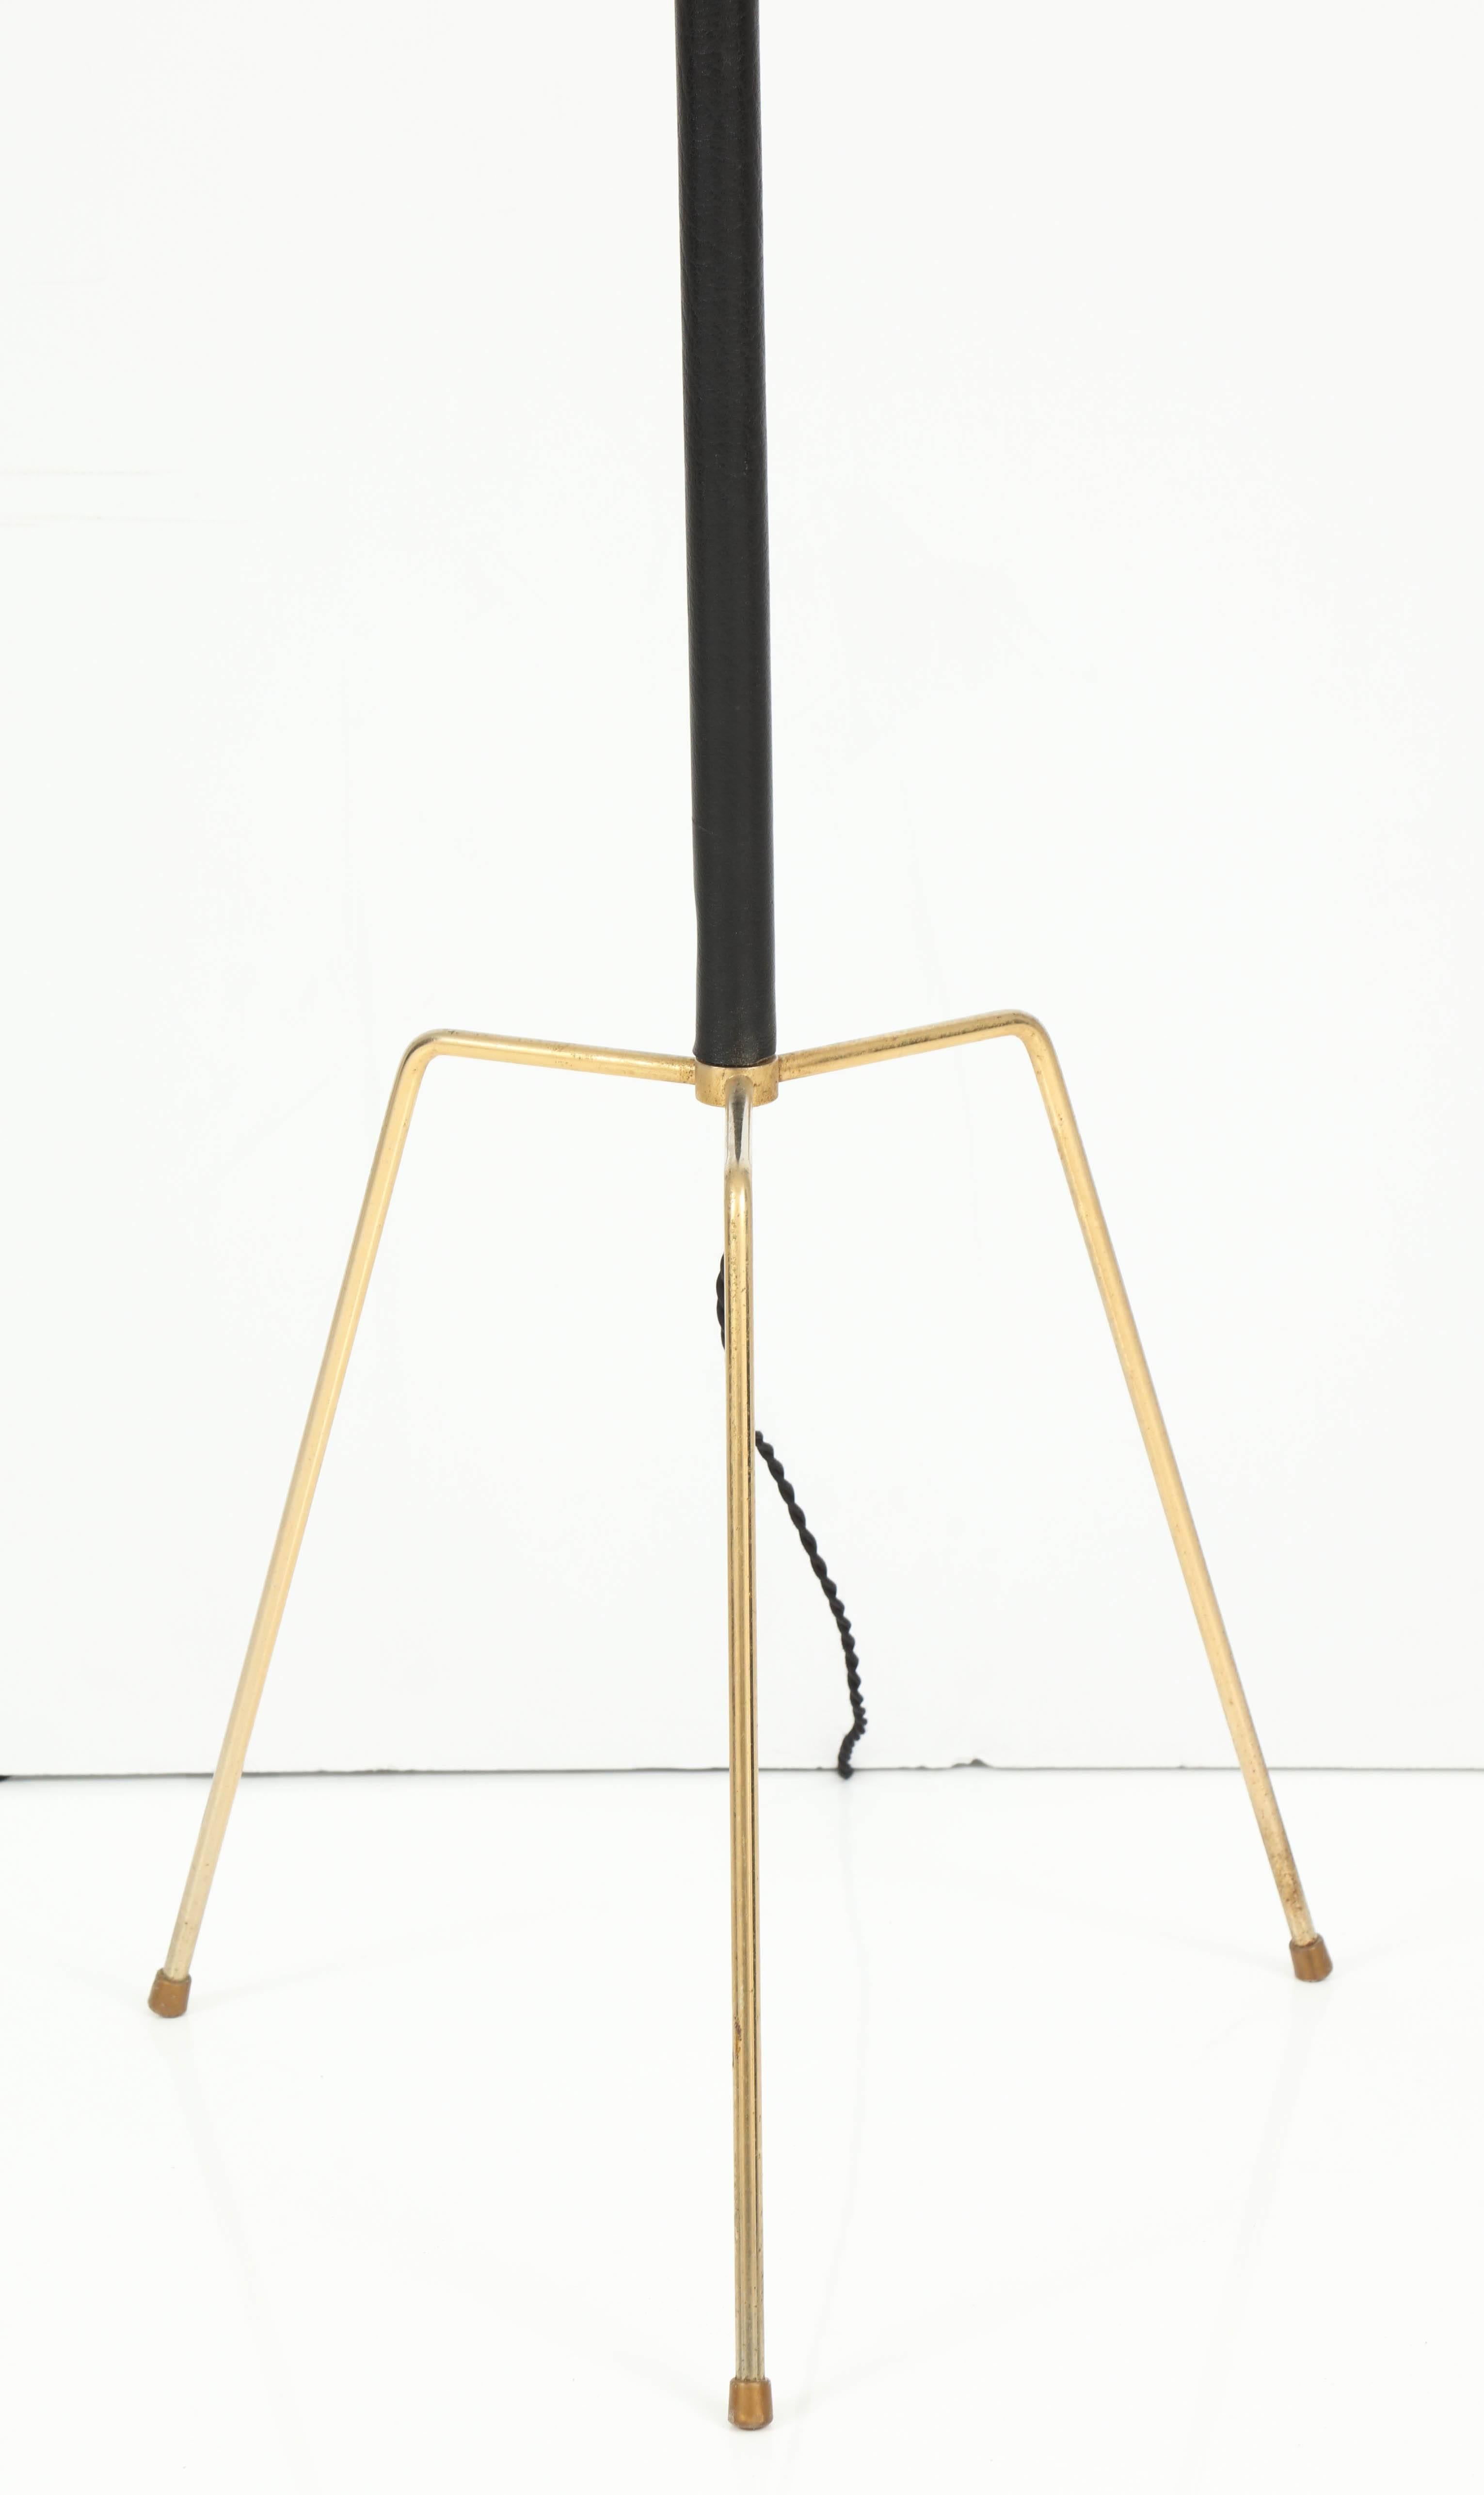 A leather stitched over brass floor lamp by Jacques Adnet, all vintage with new shade and wiring.